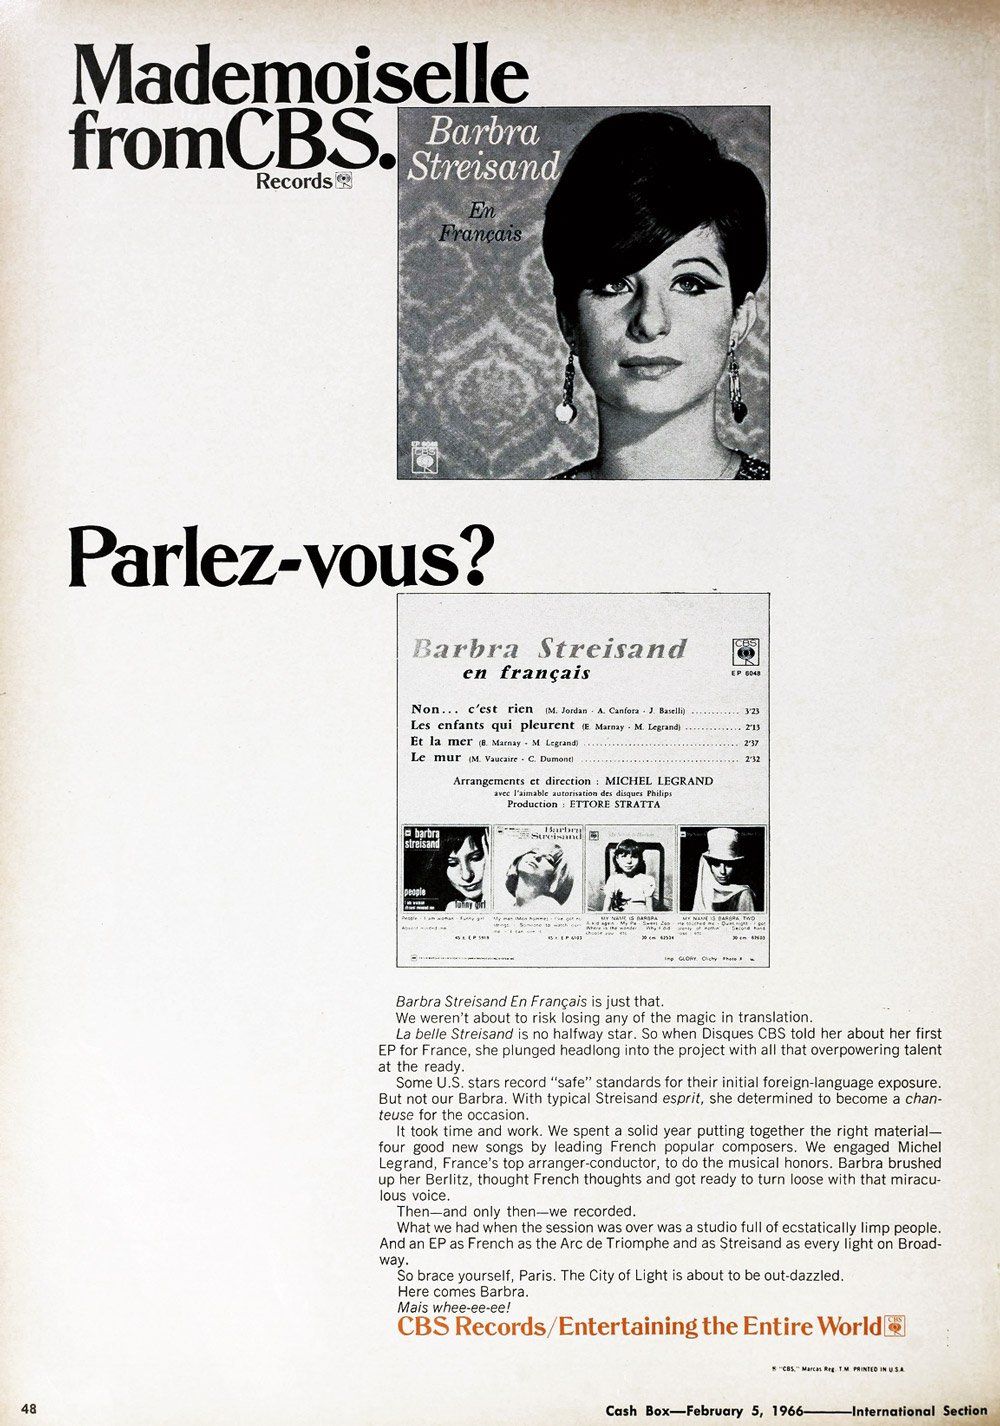 Ad which reads: Mademoiselle from CBS Records. Parlez-vous?